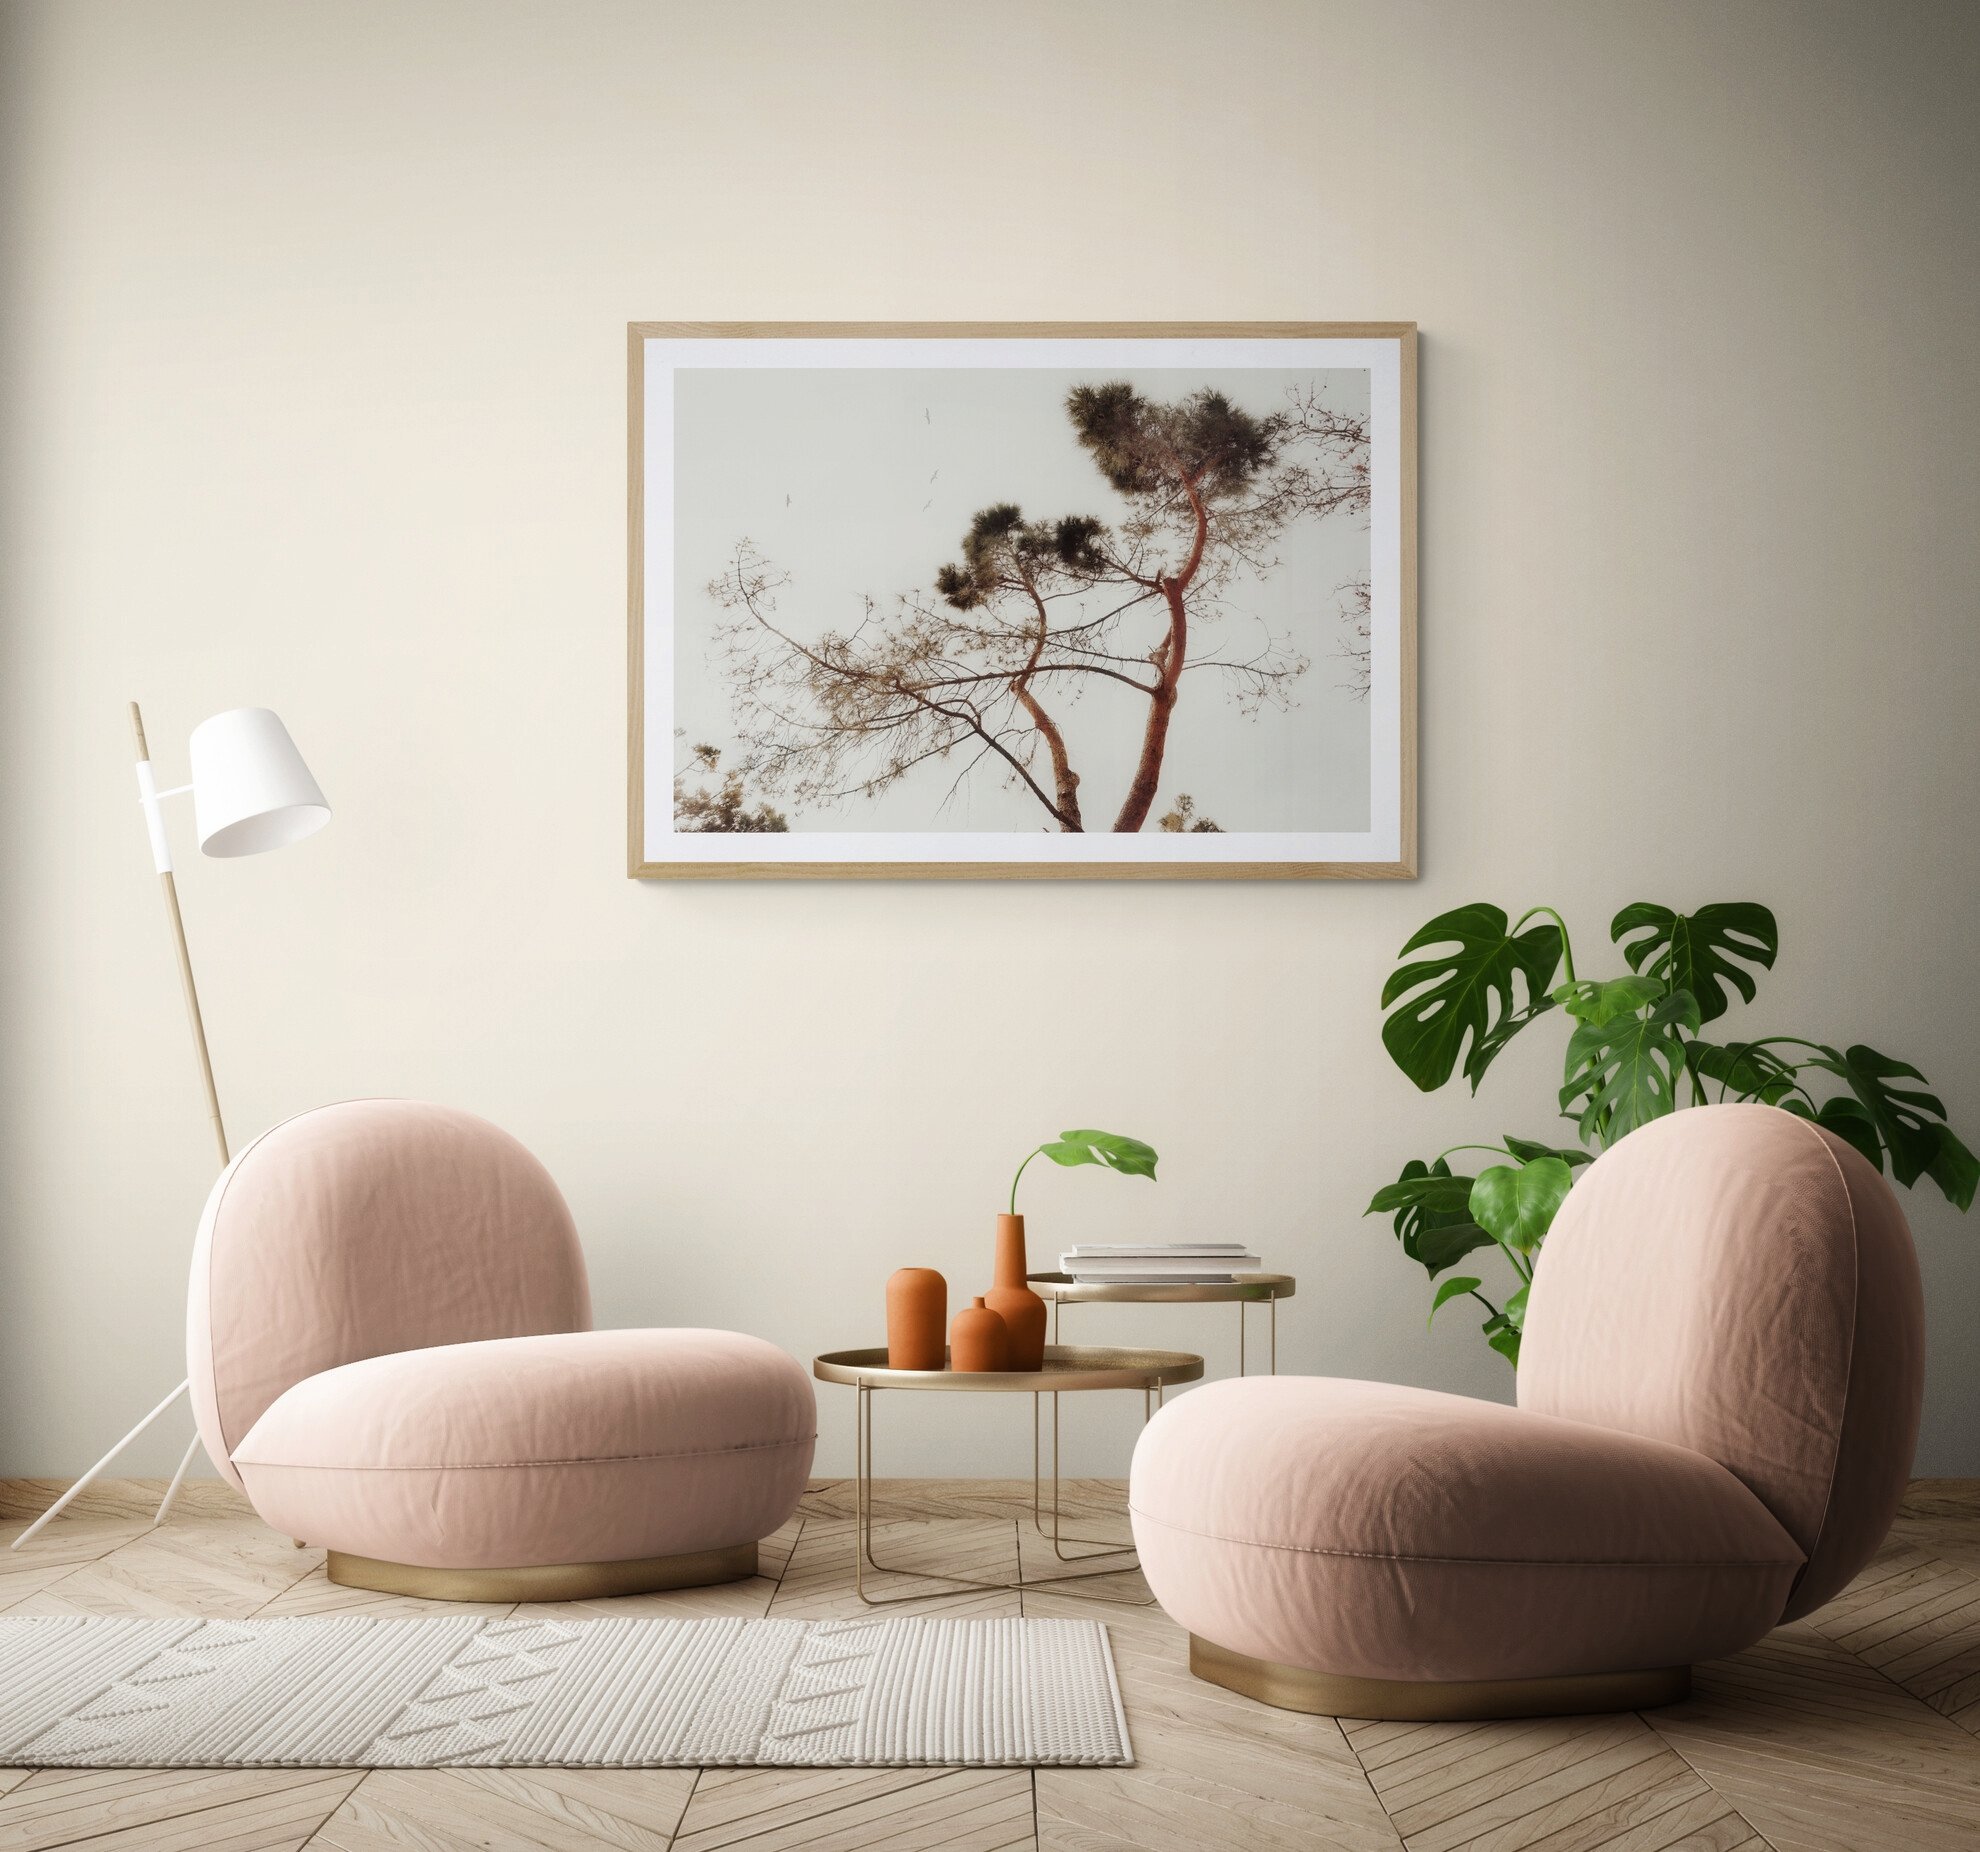 EDITED_Modern_living_room_with_comfy_chairs-01.jpeg